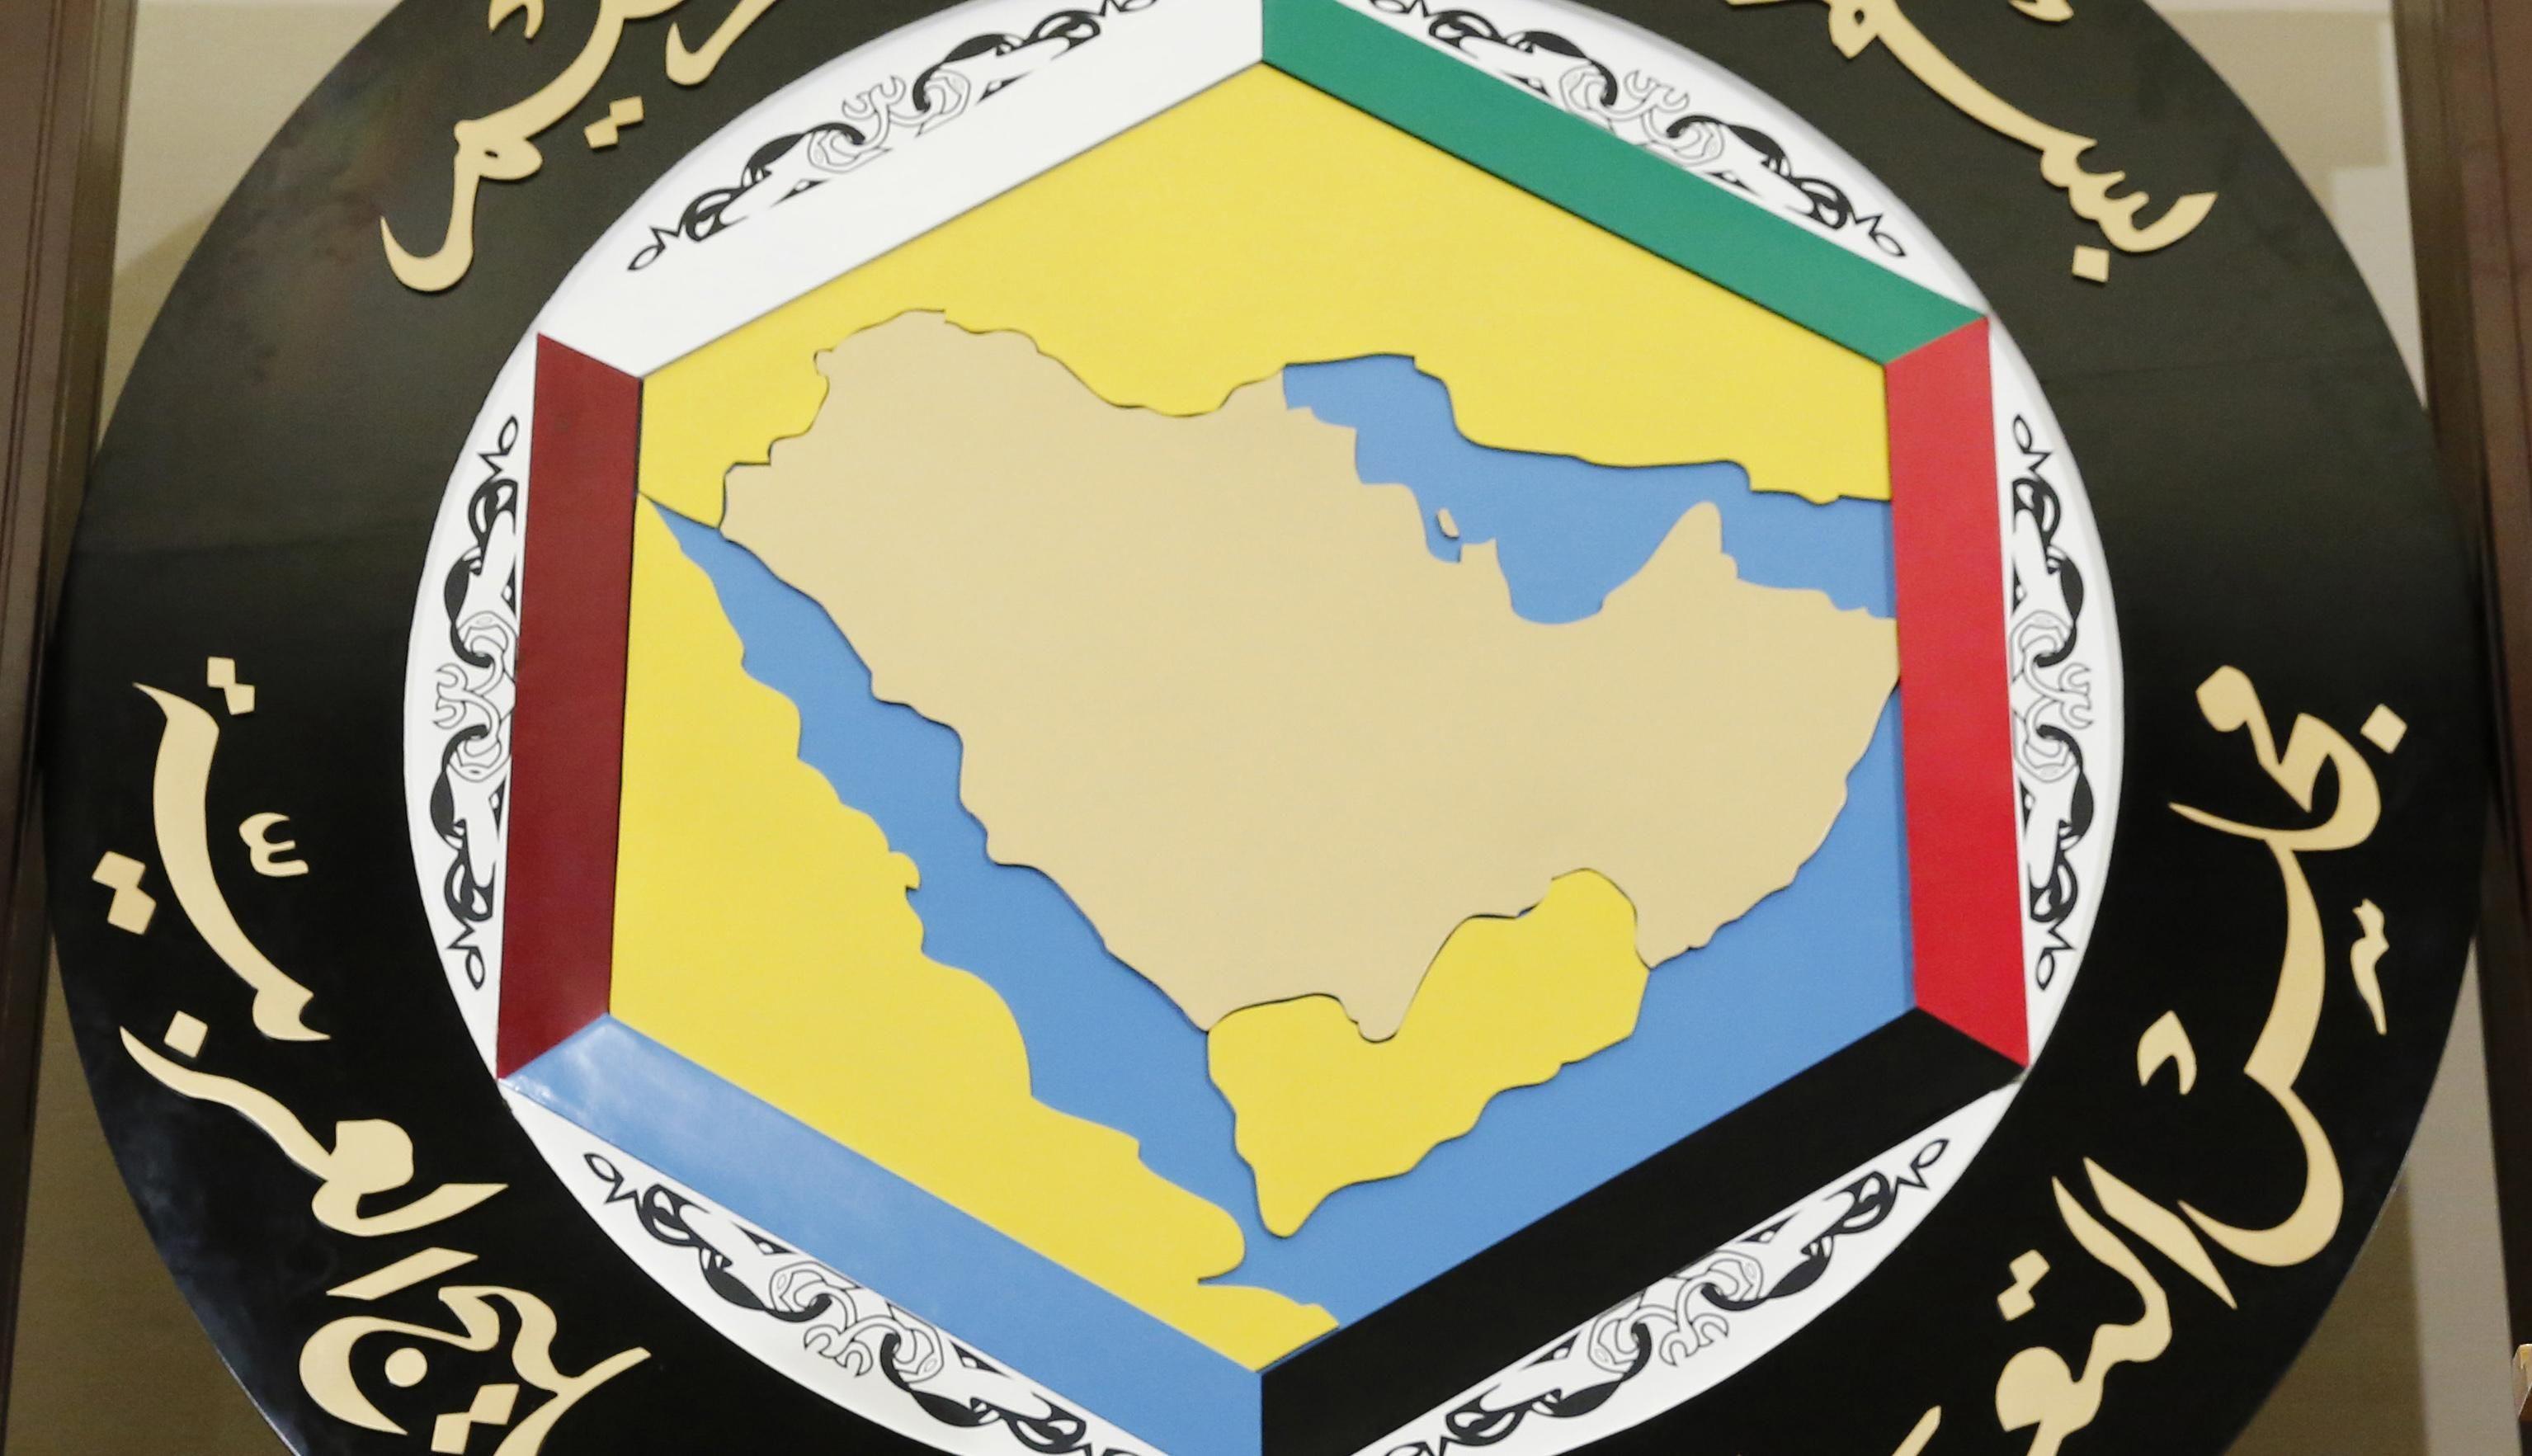 GCC Logo - Is the GCC Worth Belonging To? | Chatham House